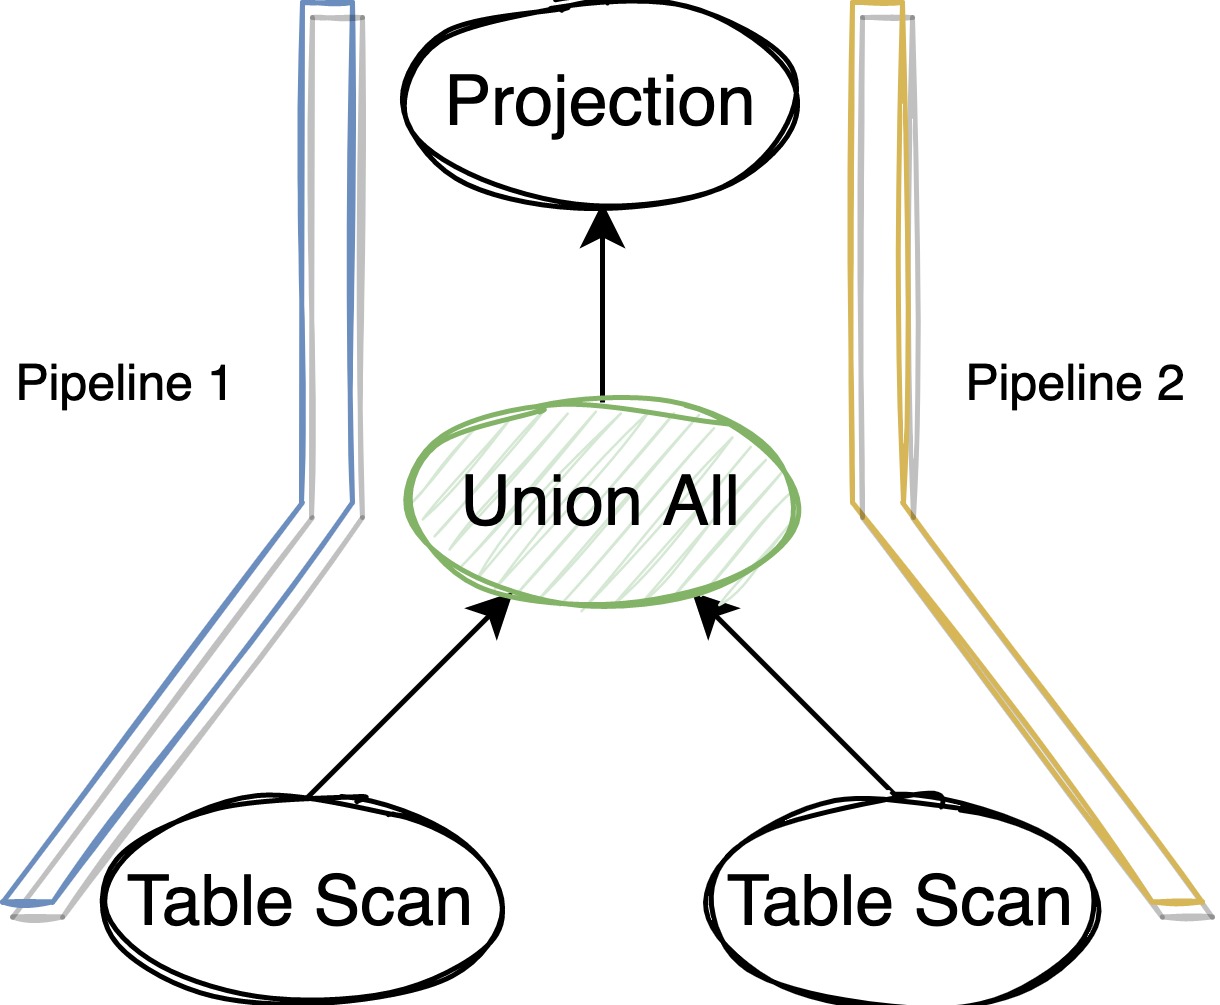 Union All to Pipelines